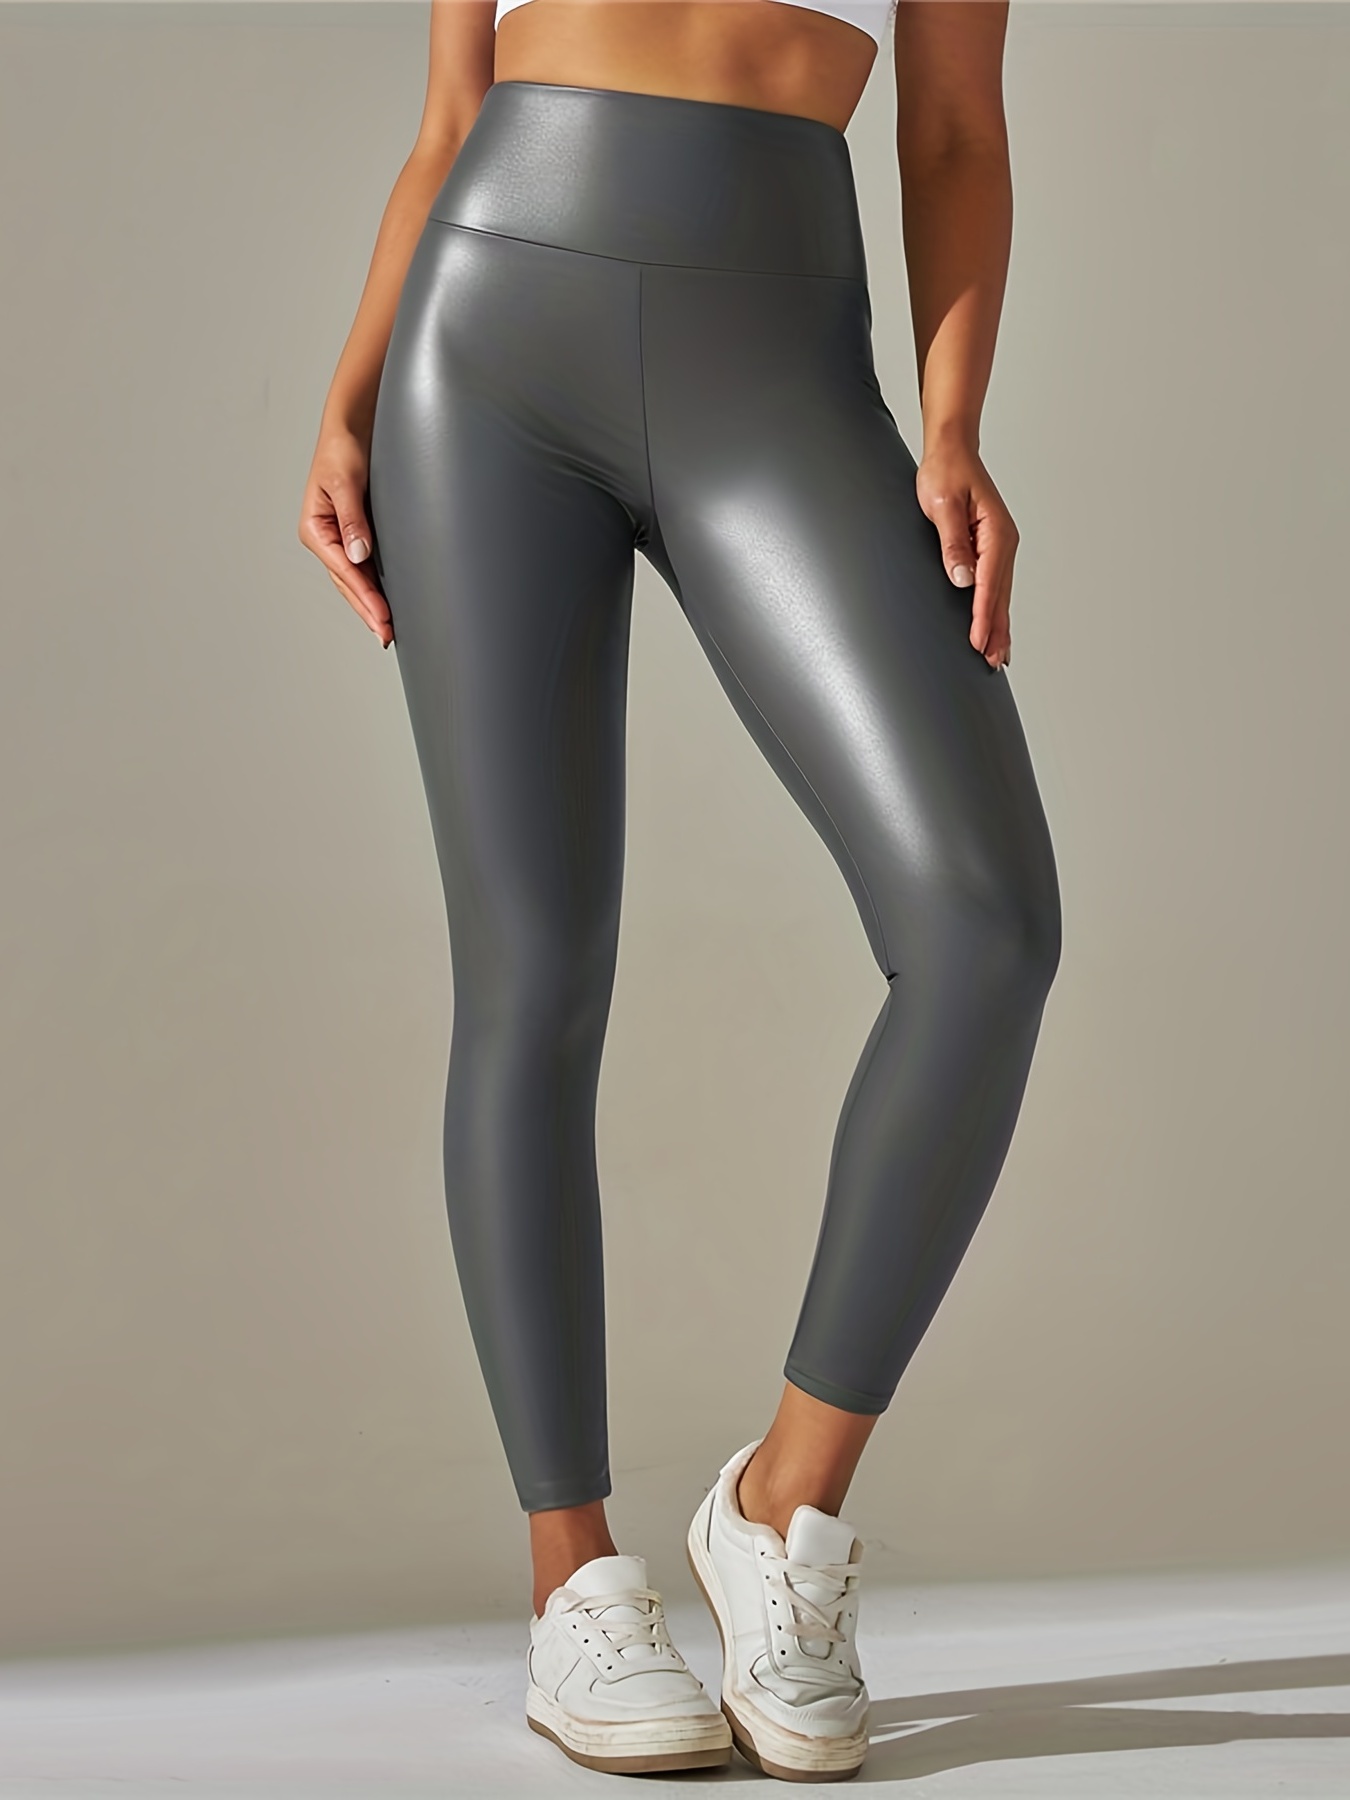 Women Pants Clearance Sale Womens Sexy Shiny Faux Leather Leggings Pants  Clubwear Trousers Tight Body Silver M P25058